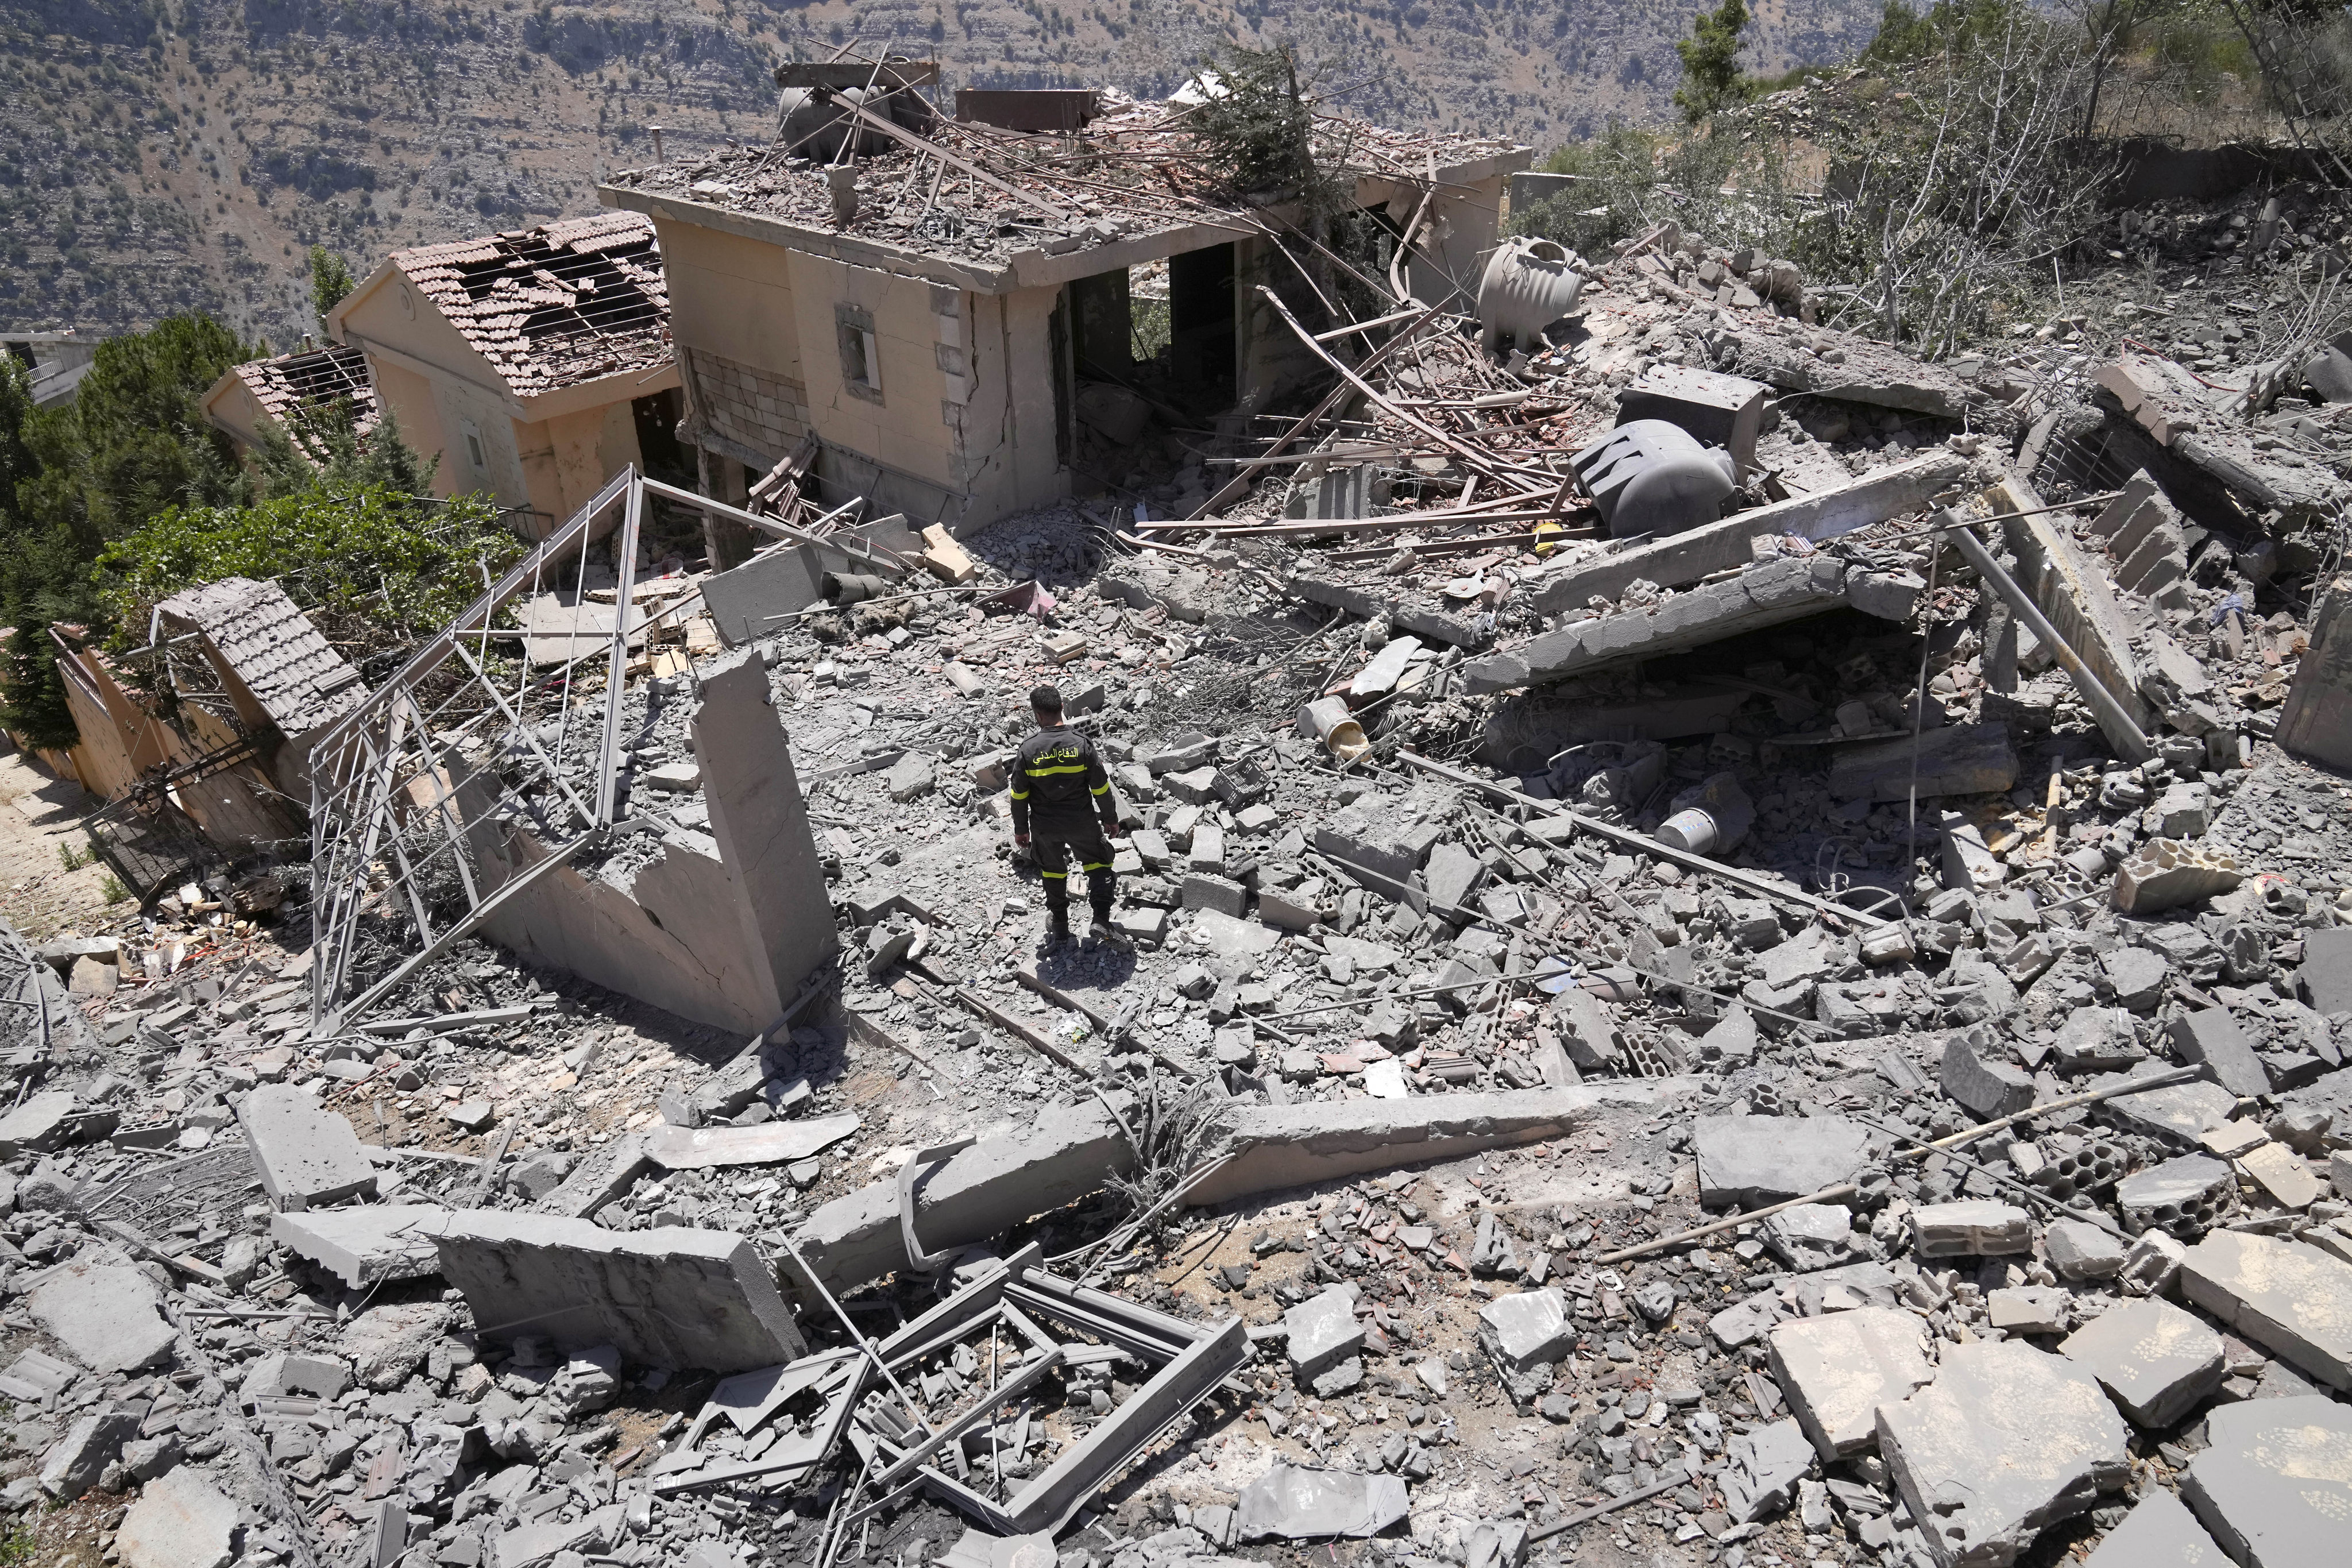 A civil defence worker inspects a destroyed house that was hit by an Israeli air strike, in Chebaa, a Lebanese town. Photo: AP